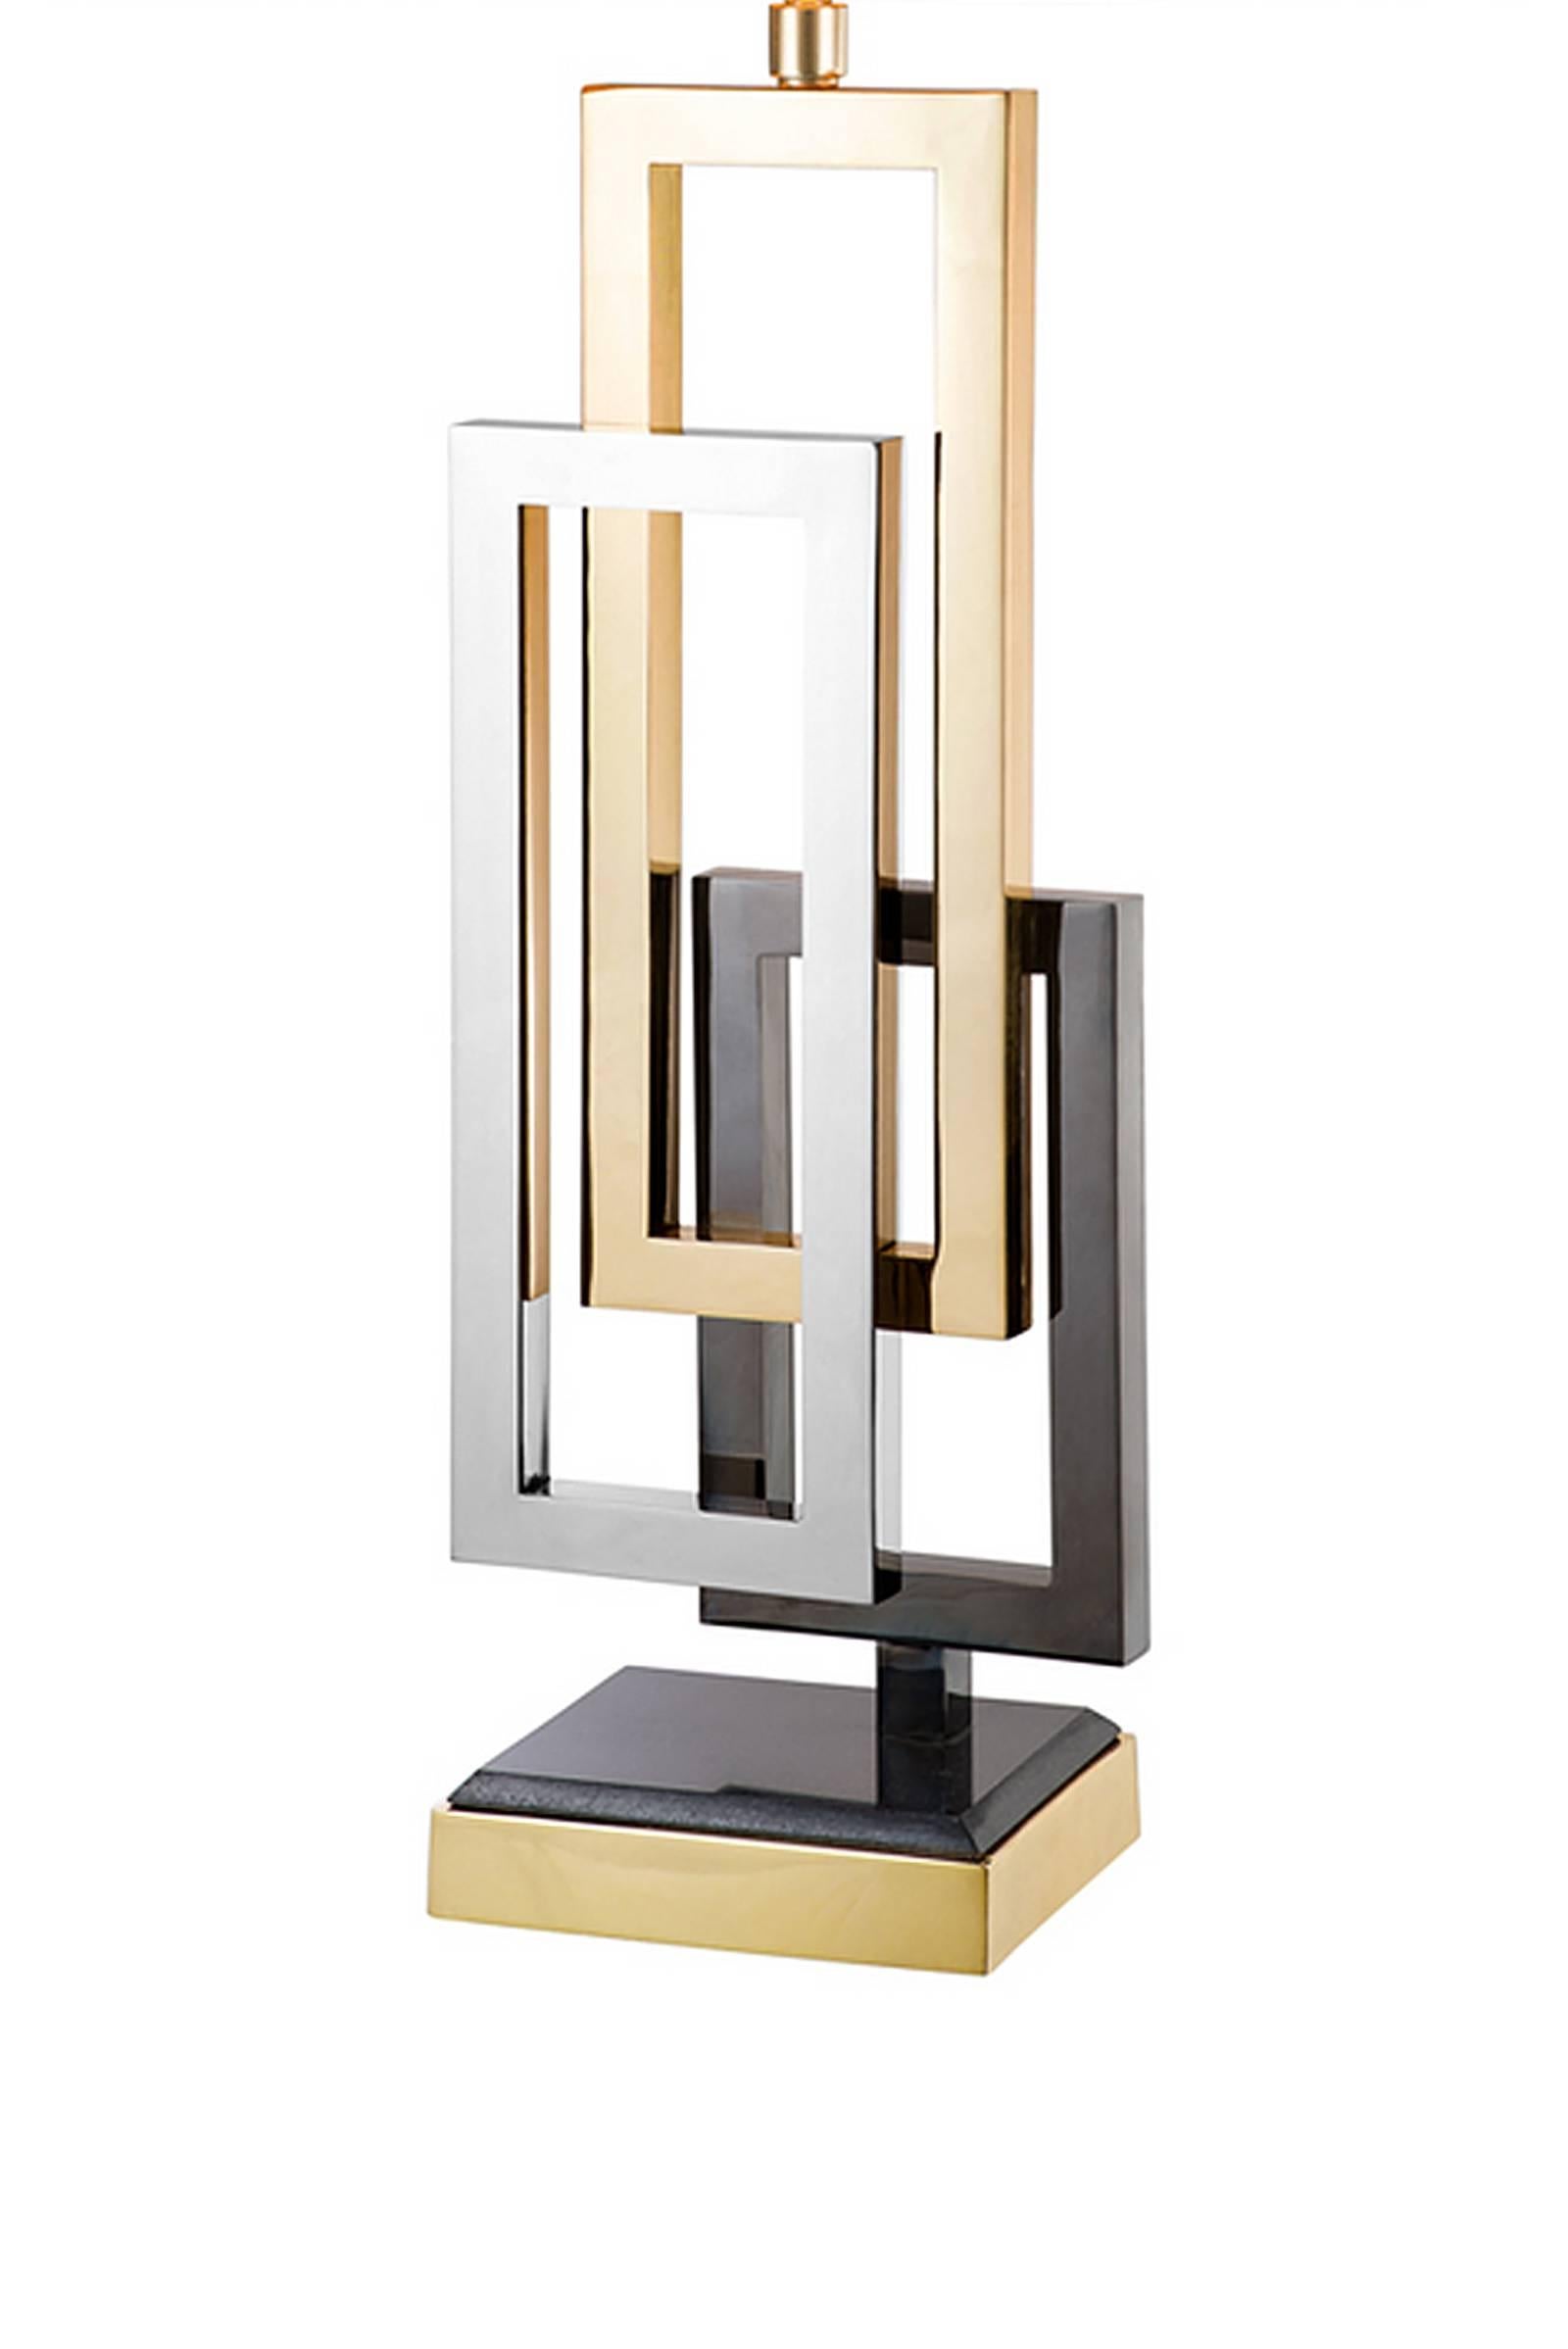 Table lamp Cadres with nickel finish, black nickel 
finish and brass finish, with black lamp shade.
